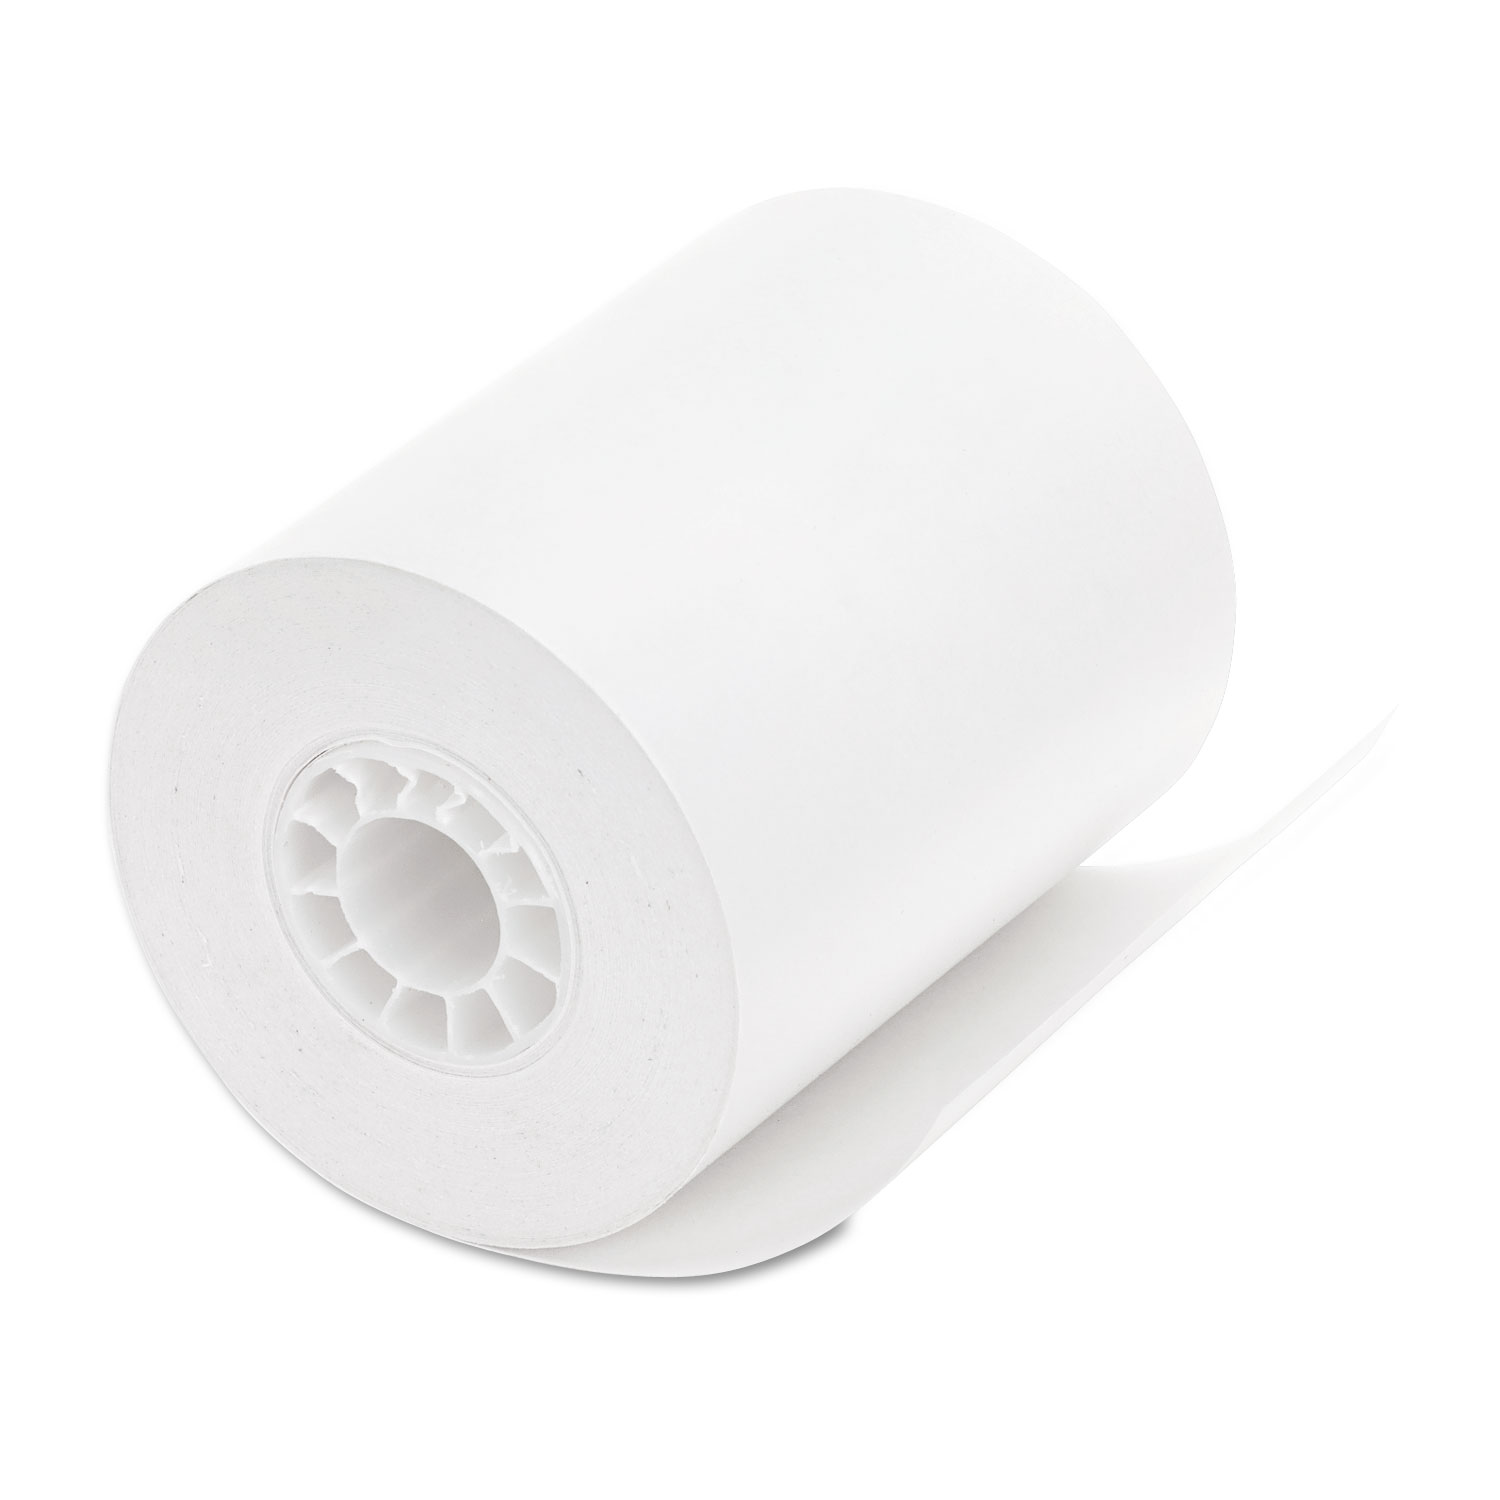  Iconex 6370 Direct Thermal Printing Thermal Paper Rolls, 2.25 x 80 ft, White, 12/Pack (ICX90783046) 